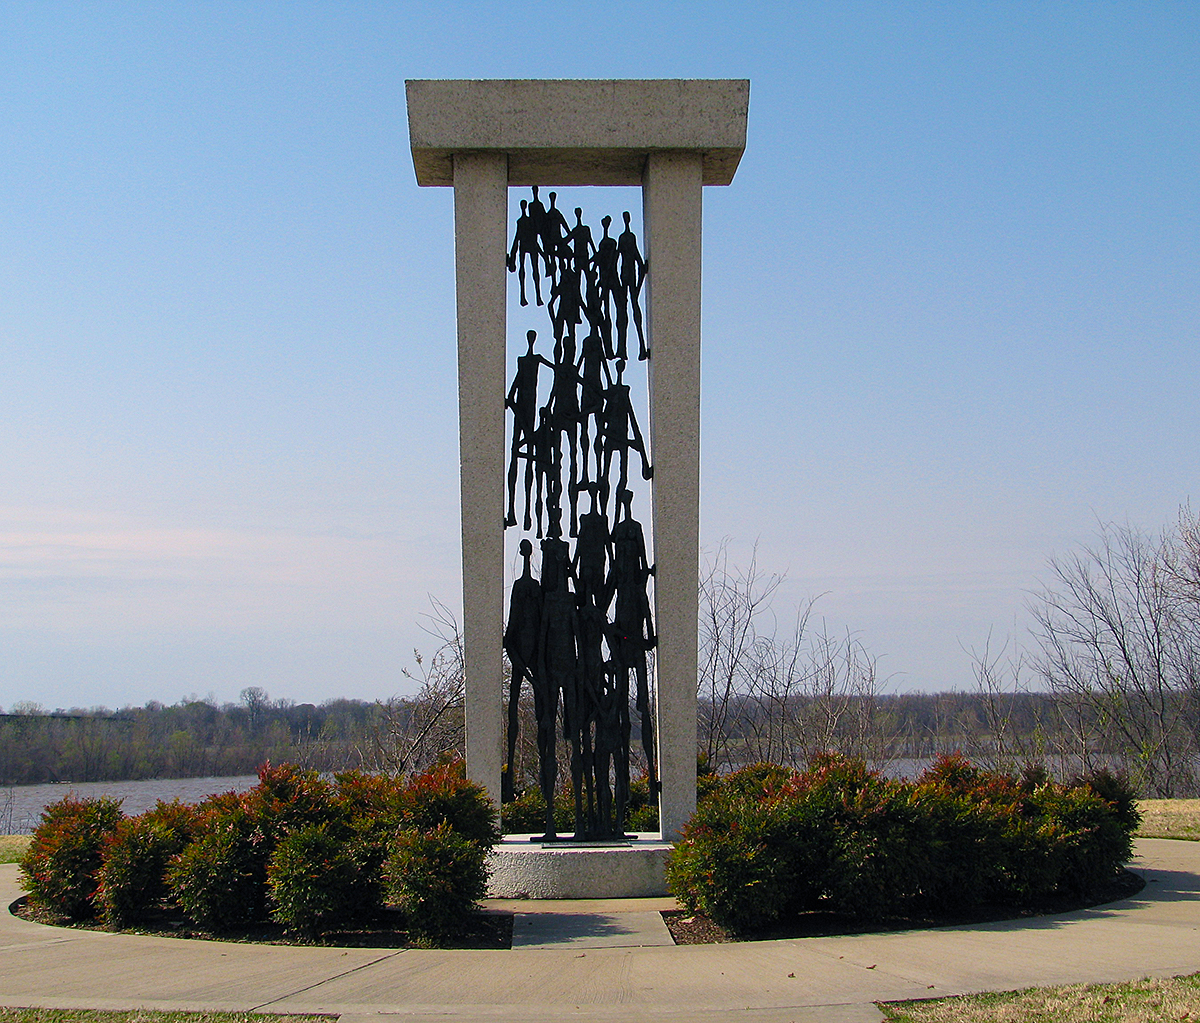 Memorial to victims of Yellow Fever epidemic at Martyrs Park, Memphis, Tennessee, March 27, 2010. Photograph by Flickr user Karen P. Creative Commons license CC BY-NC-ND 2.0.